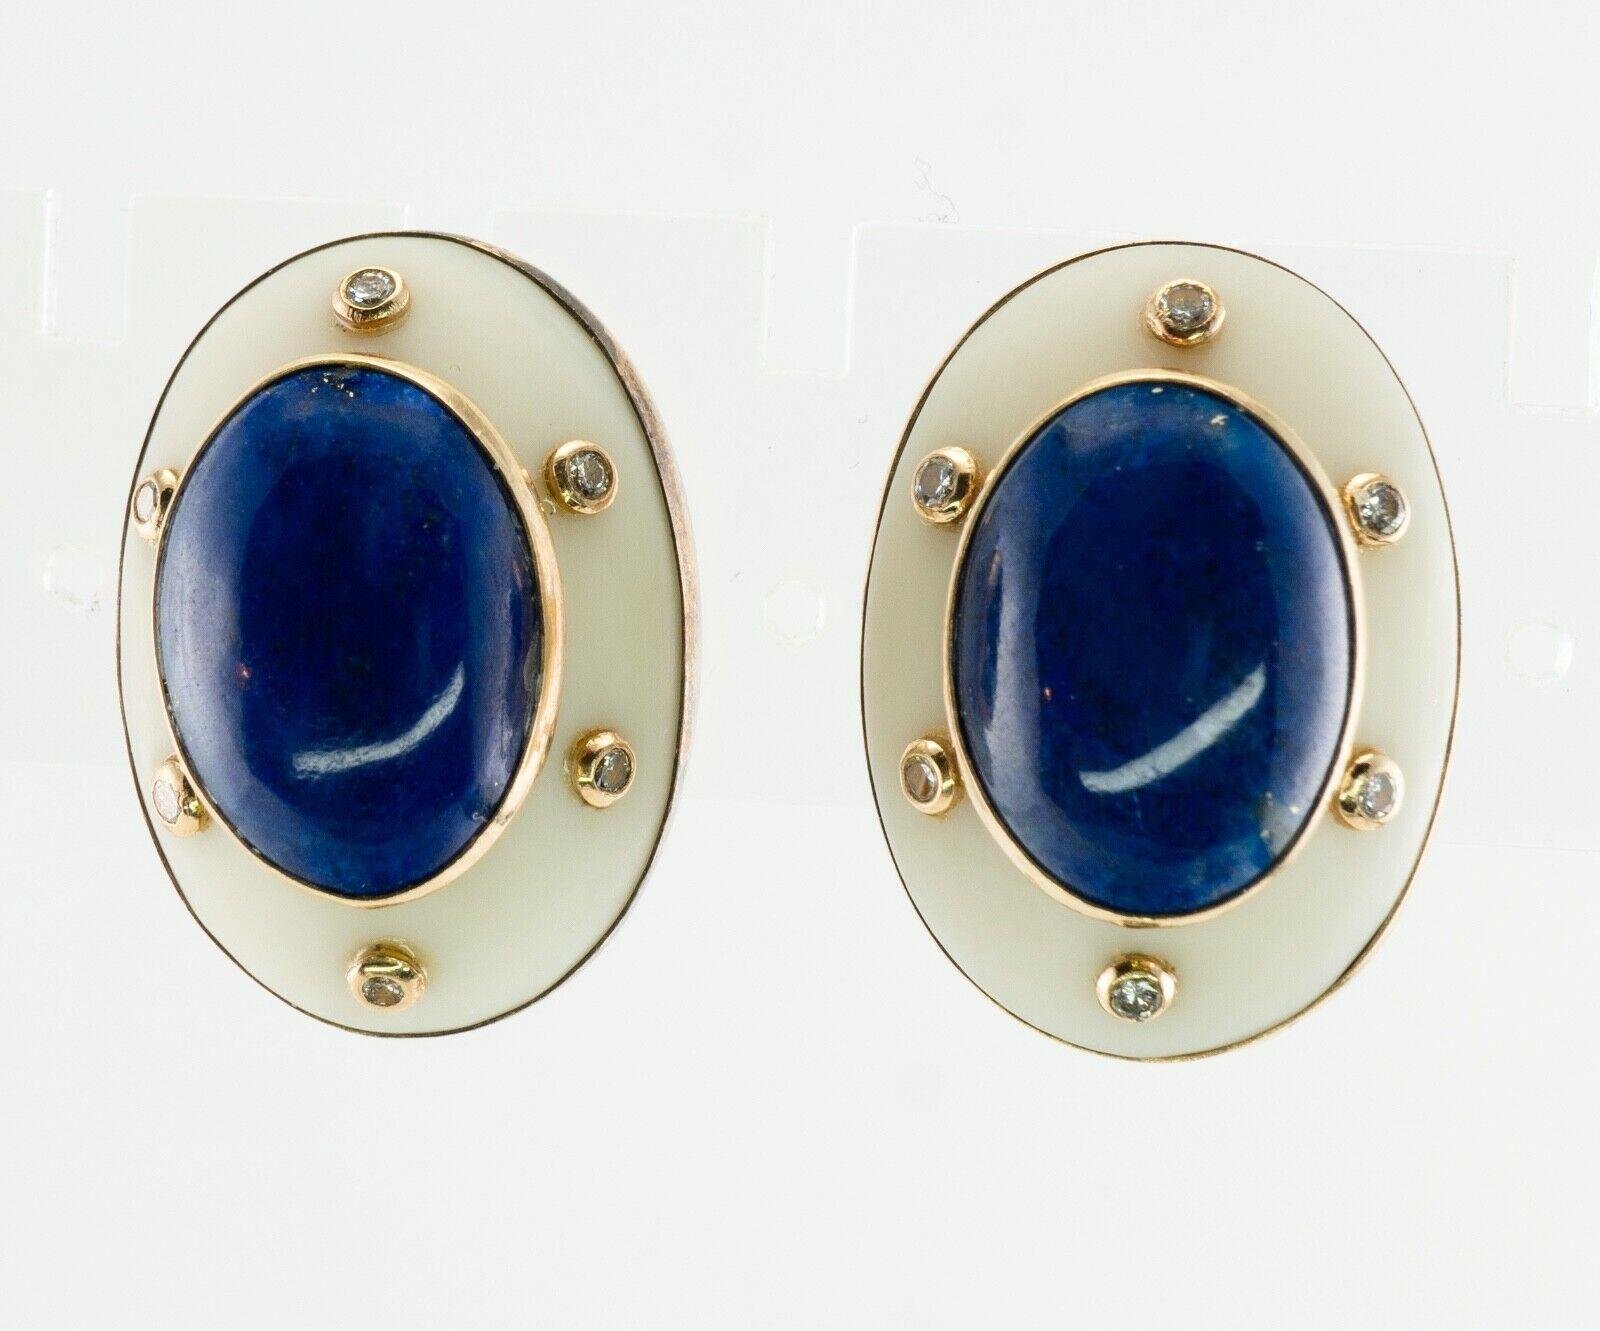 Lapis Lazuli Diamond Earrings Camphor Crystal Vintage 14K Gold

This pair of vintage mid-century earrings is made in solid 14K Yellow Gold and 18K Gold for posts.
The center bezel set natural Lapis Lazuli measures 16mm x 12mm.
Six bezel set diamonds